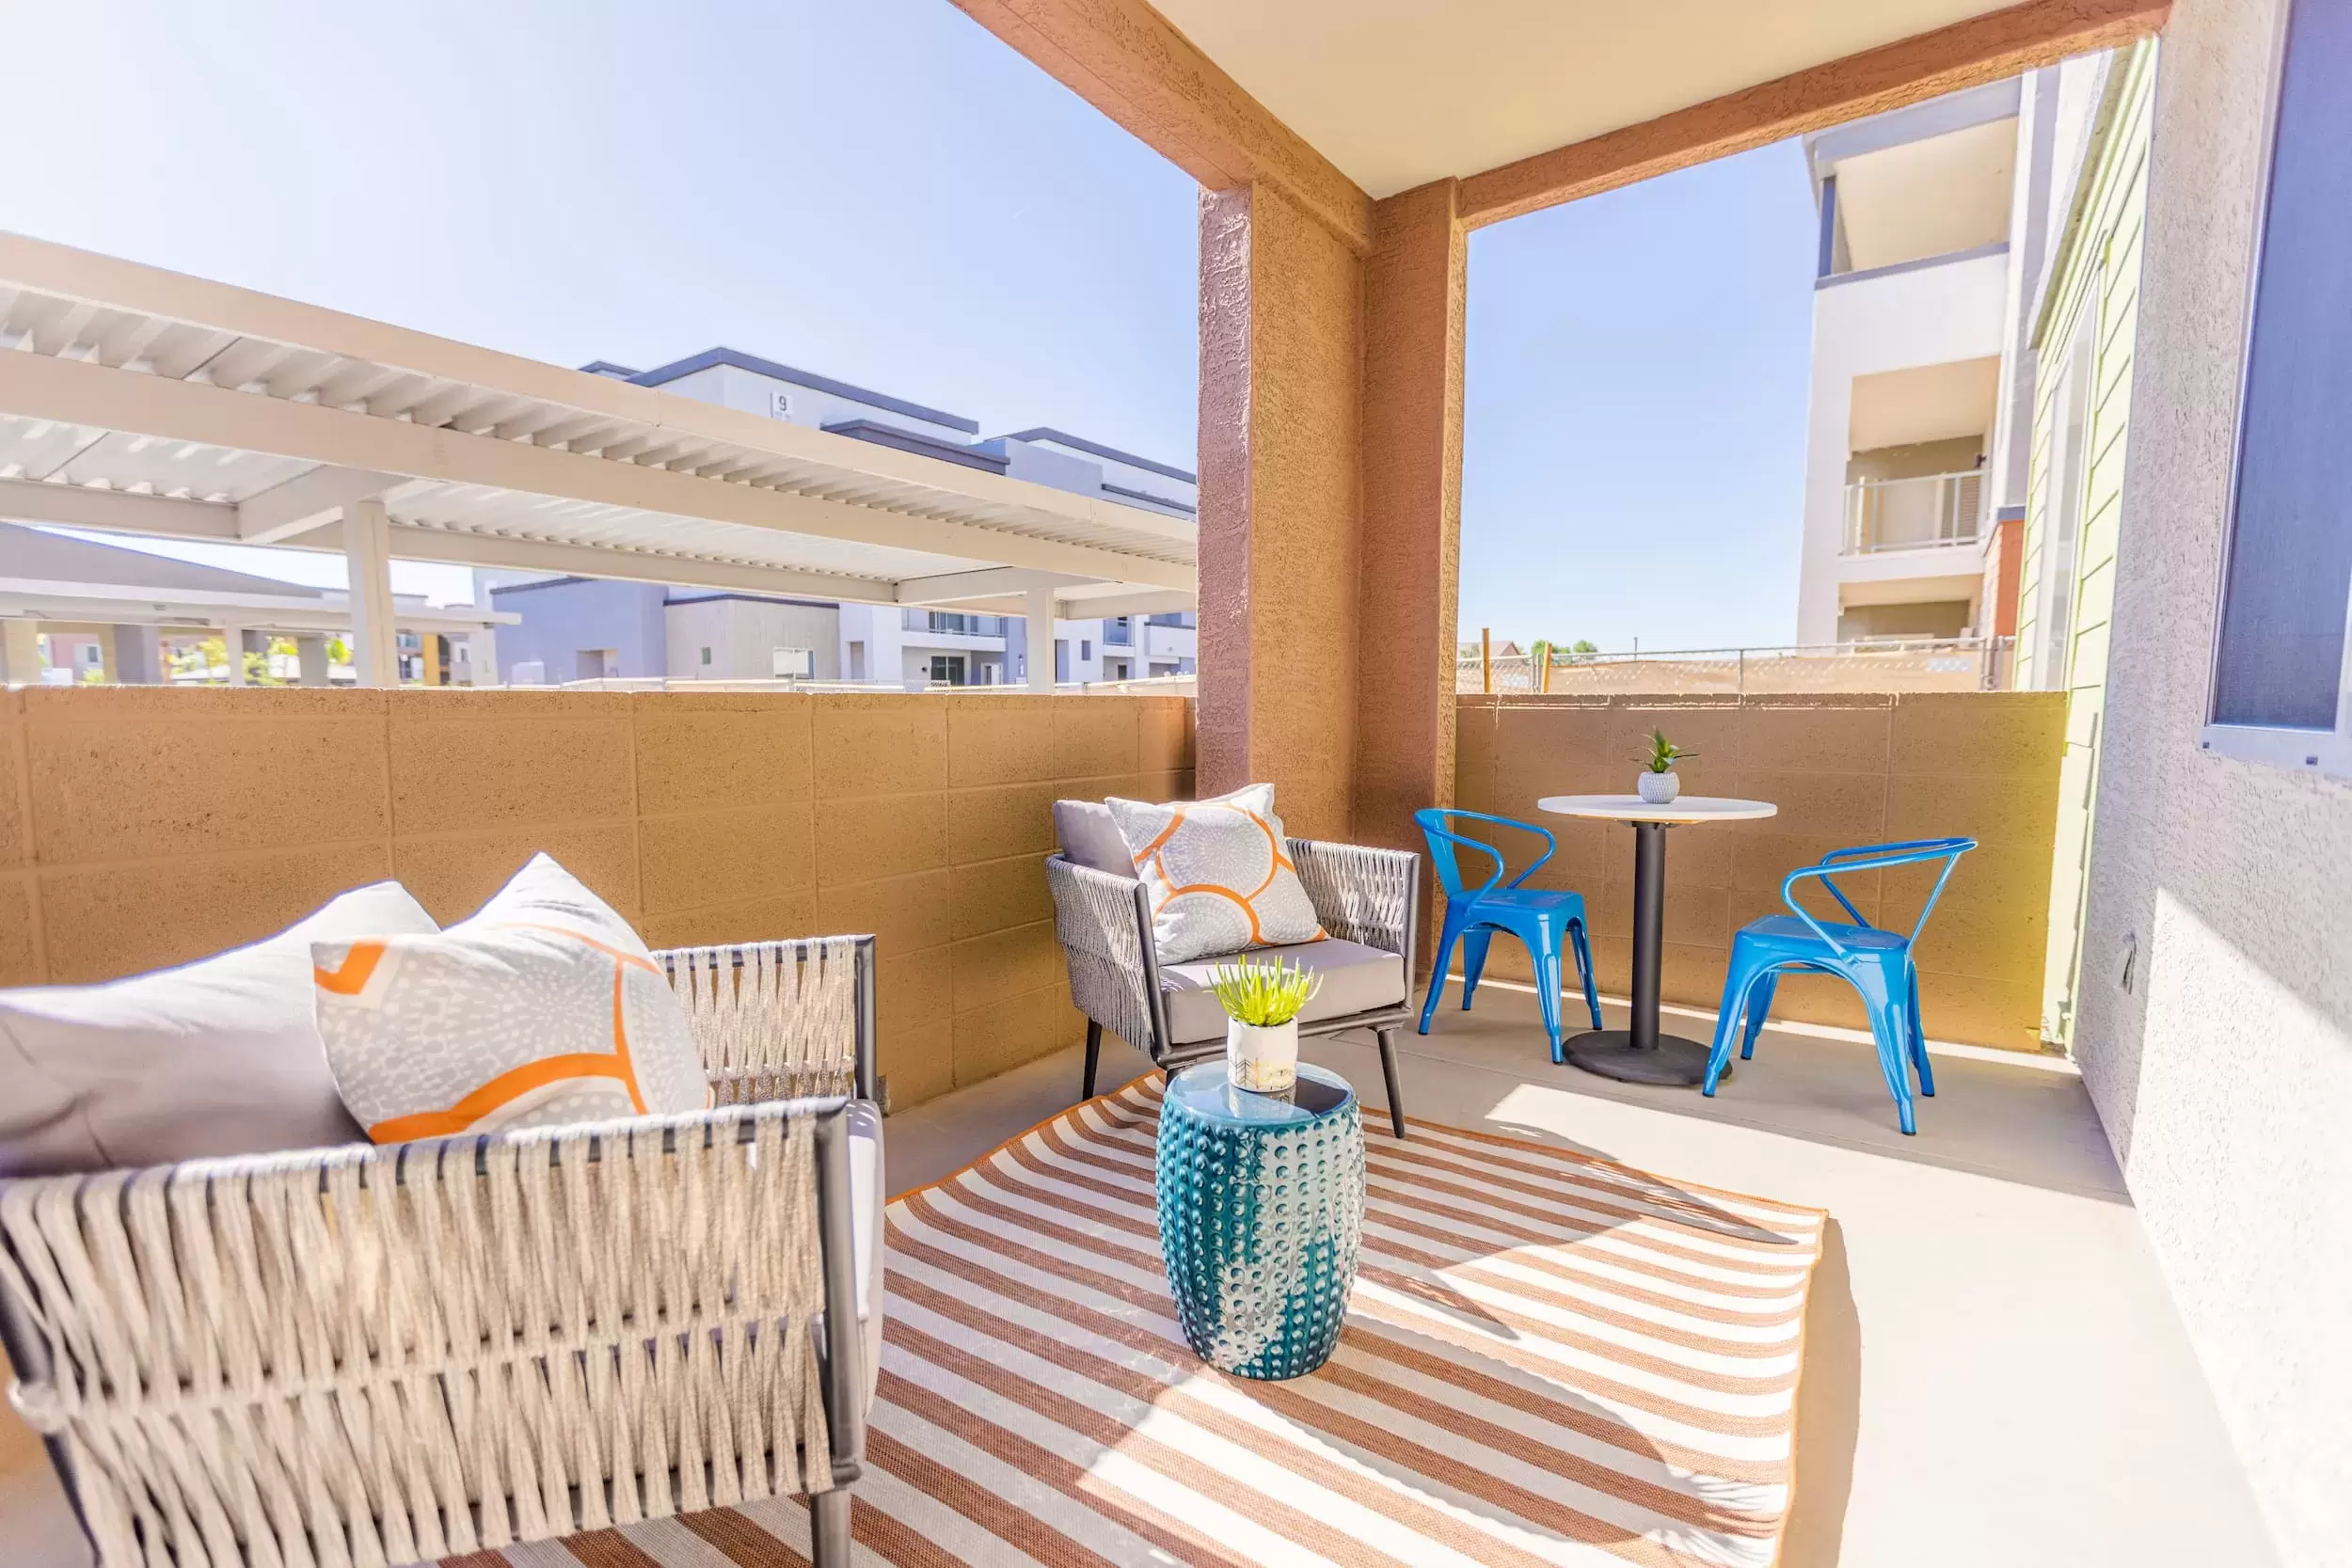 The balcony off an apartment at Liv Crossroads, with comfortable patio furniture and plenty of sunshine.